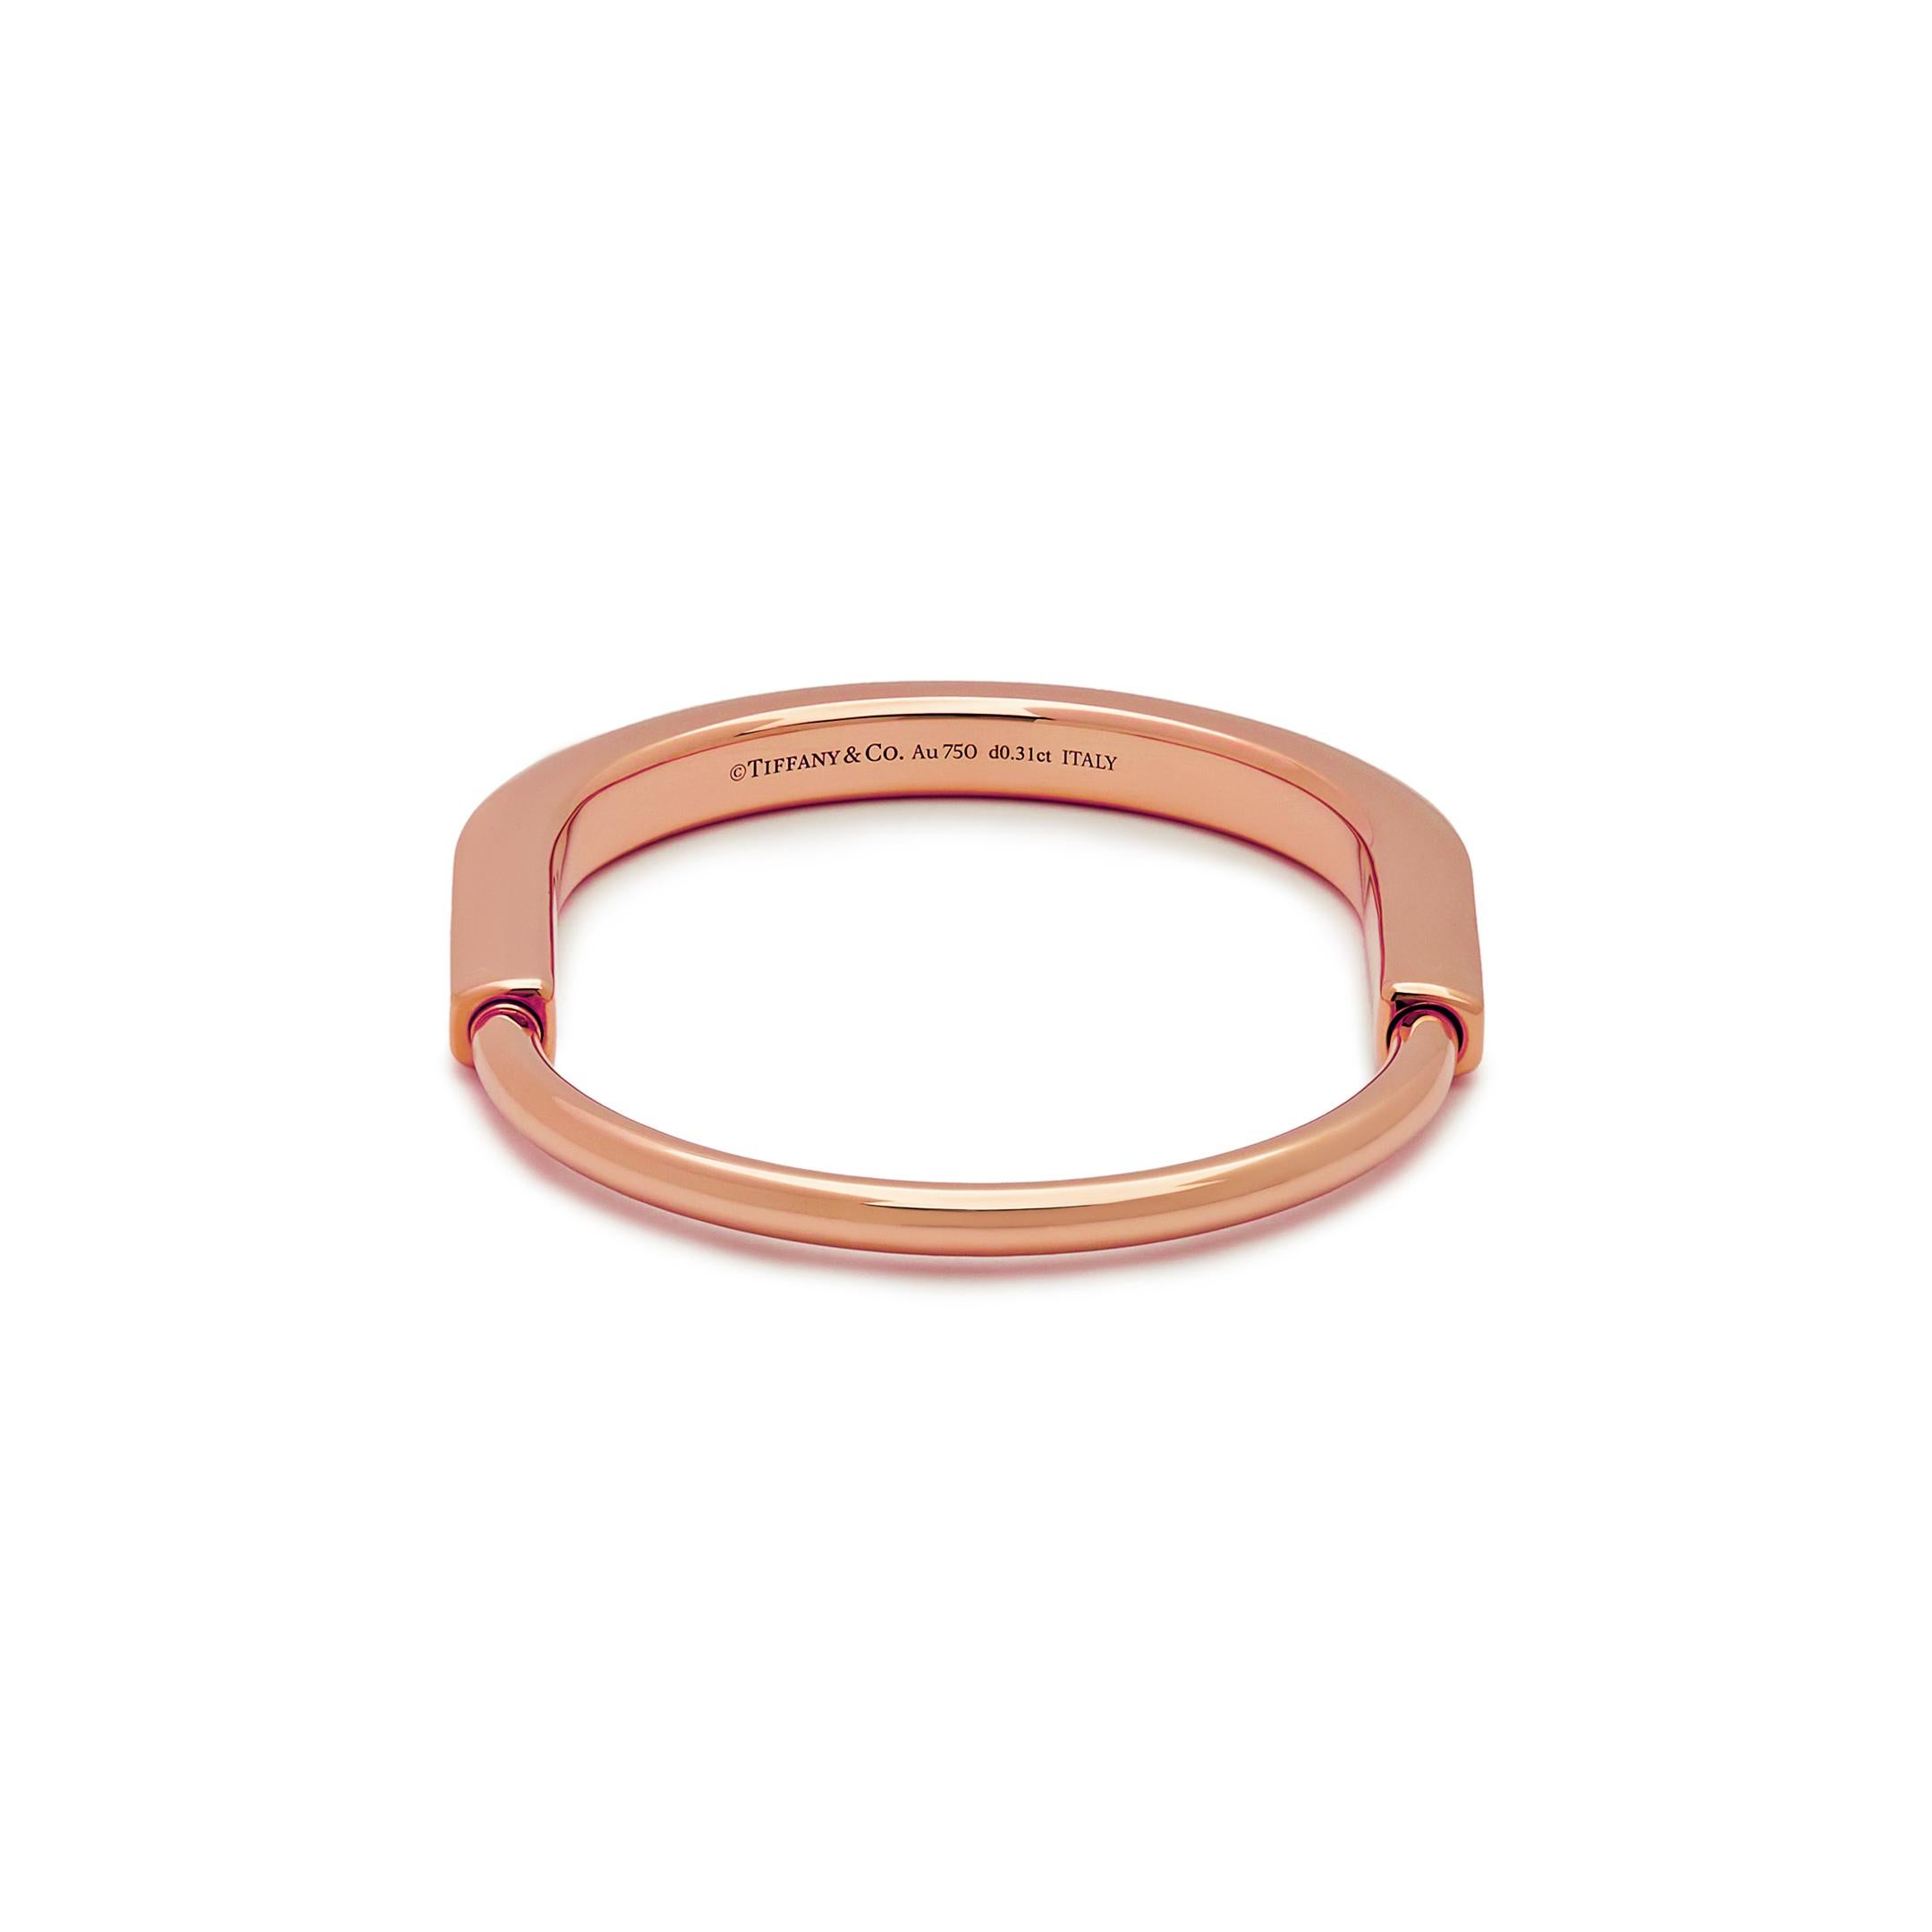 Tiffany & Co. Lock Bangle in Rose Gold with Diamond Accents 70185296 In New Condition For Sale In New York, NY